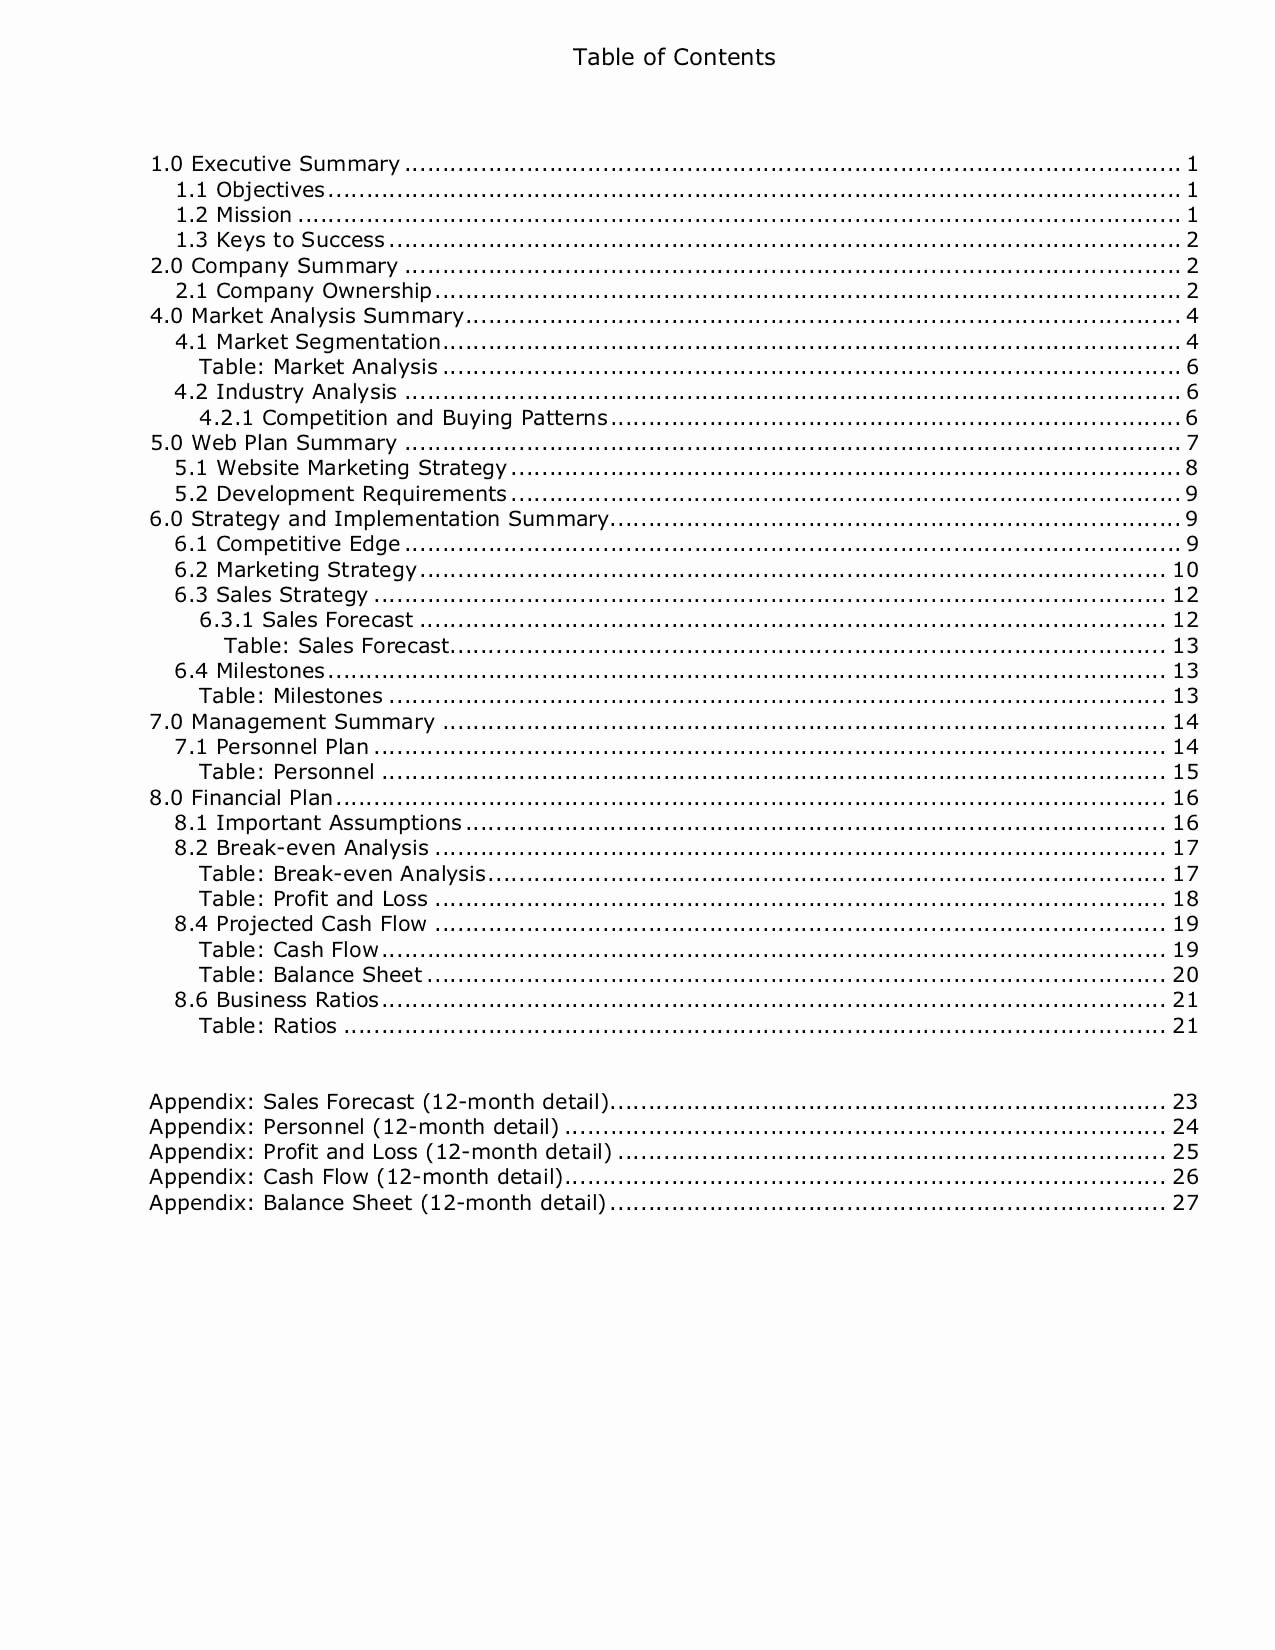 Business Plan Table Of Contents Best Of Clothing Store Business Plan Table Of Contents Sample